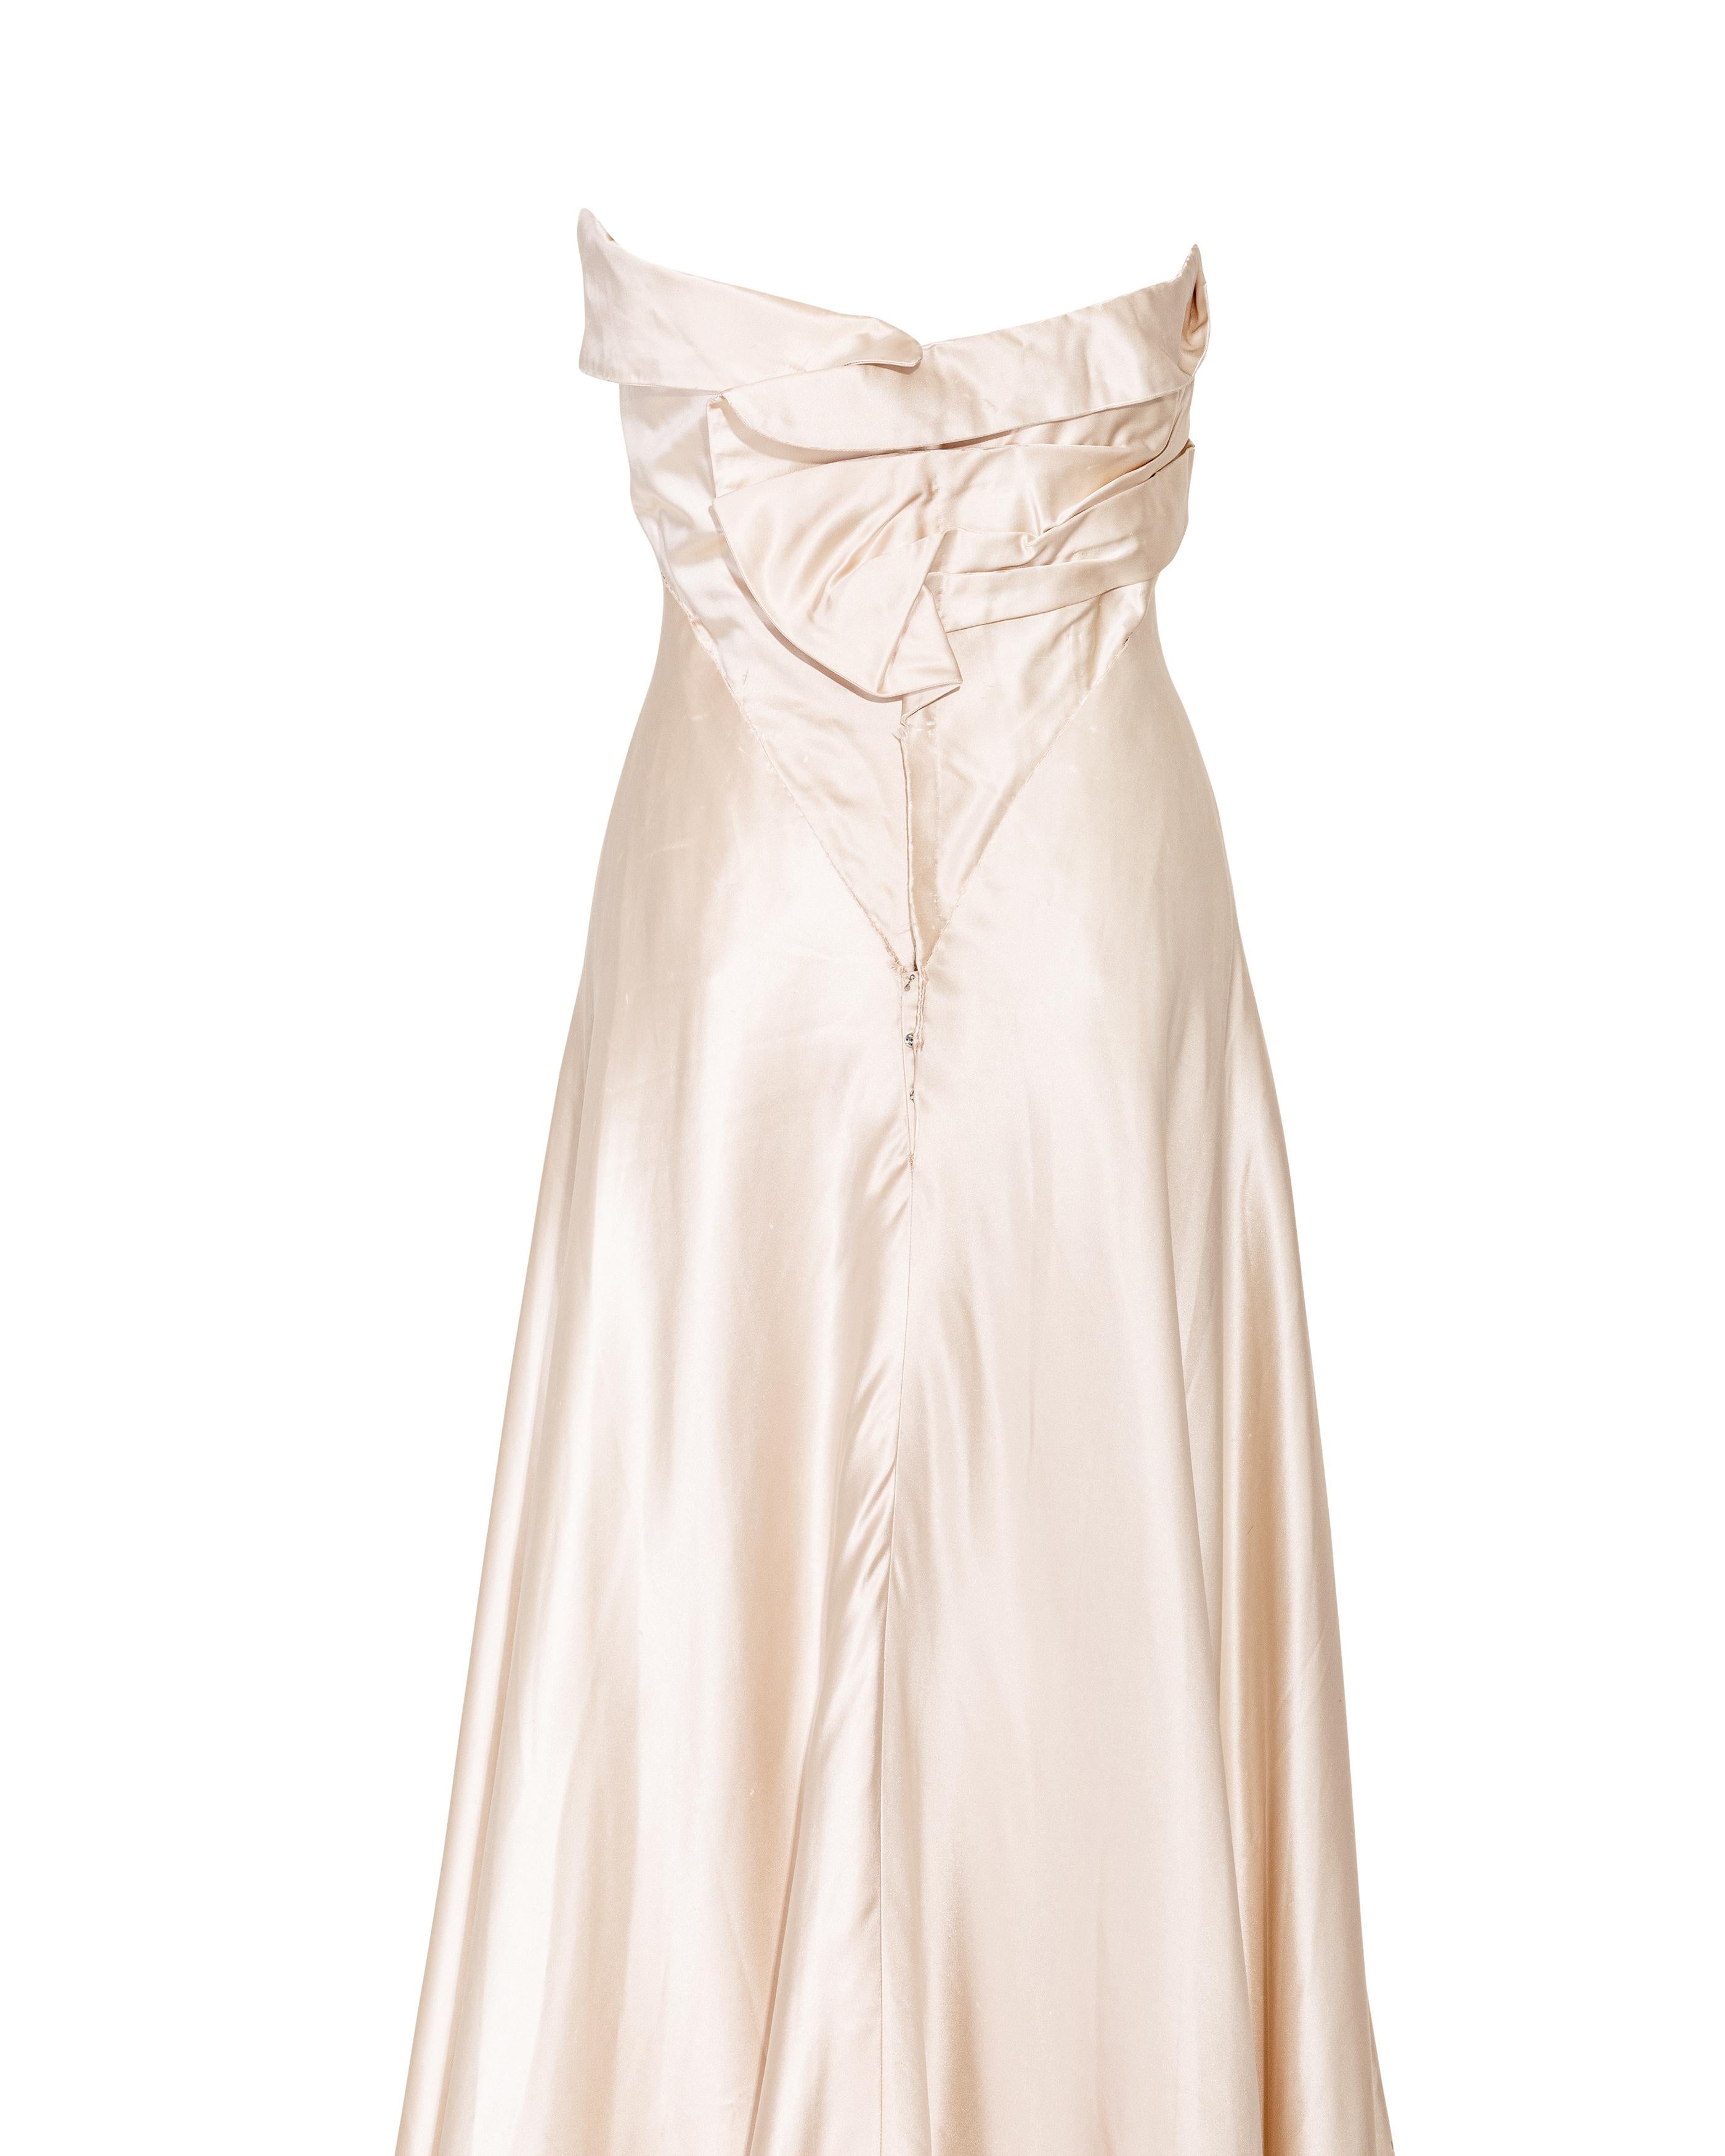 1940's Irene Lentz Haute Couture Strapless High-Low Cream Silk Gown For Sale 2